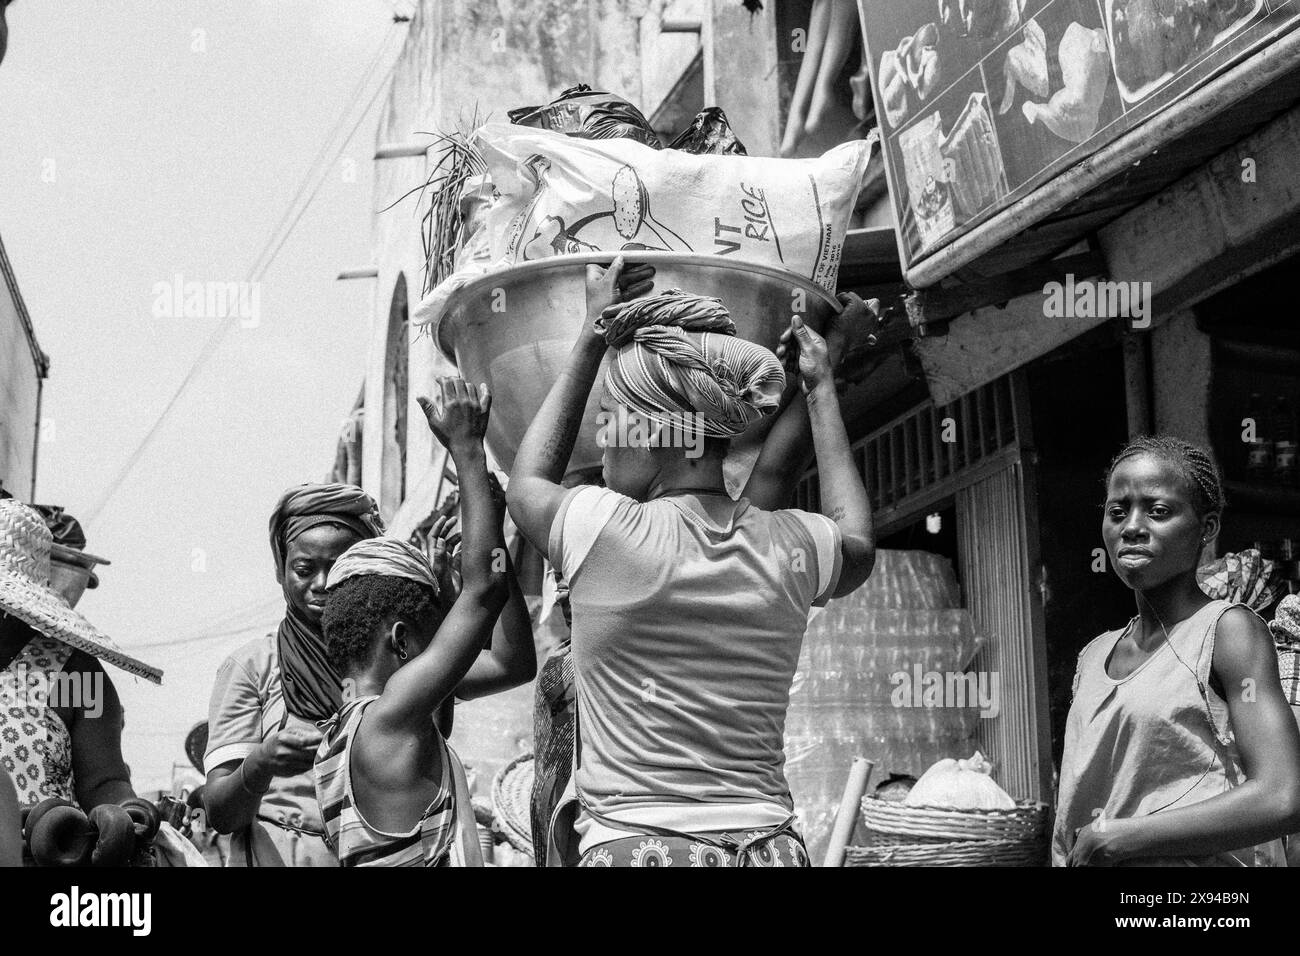 Women and children in a bustling market in Ghana, assisting with carrying heavy loads and engaging in market activities. Stock Photo